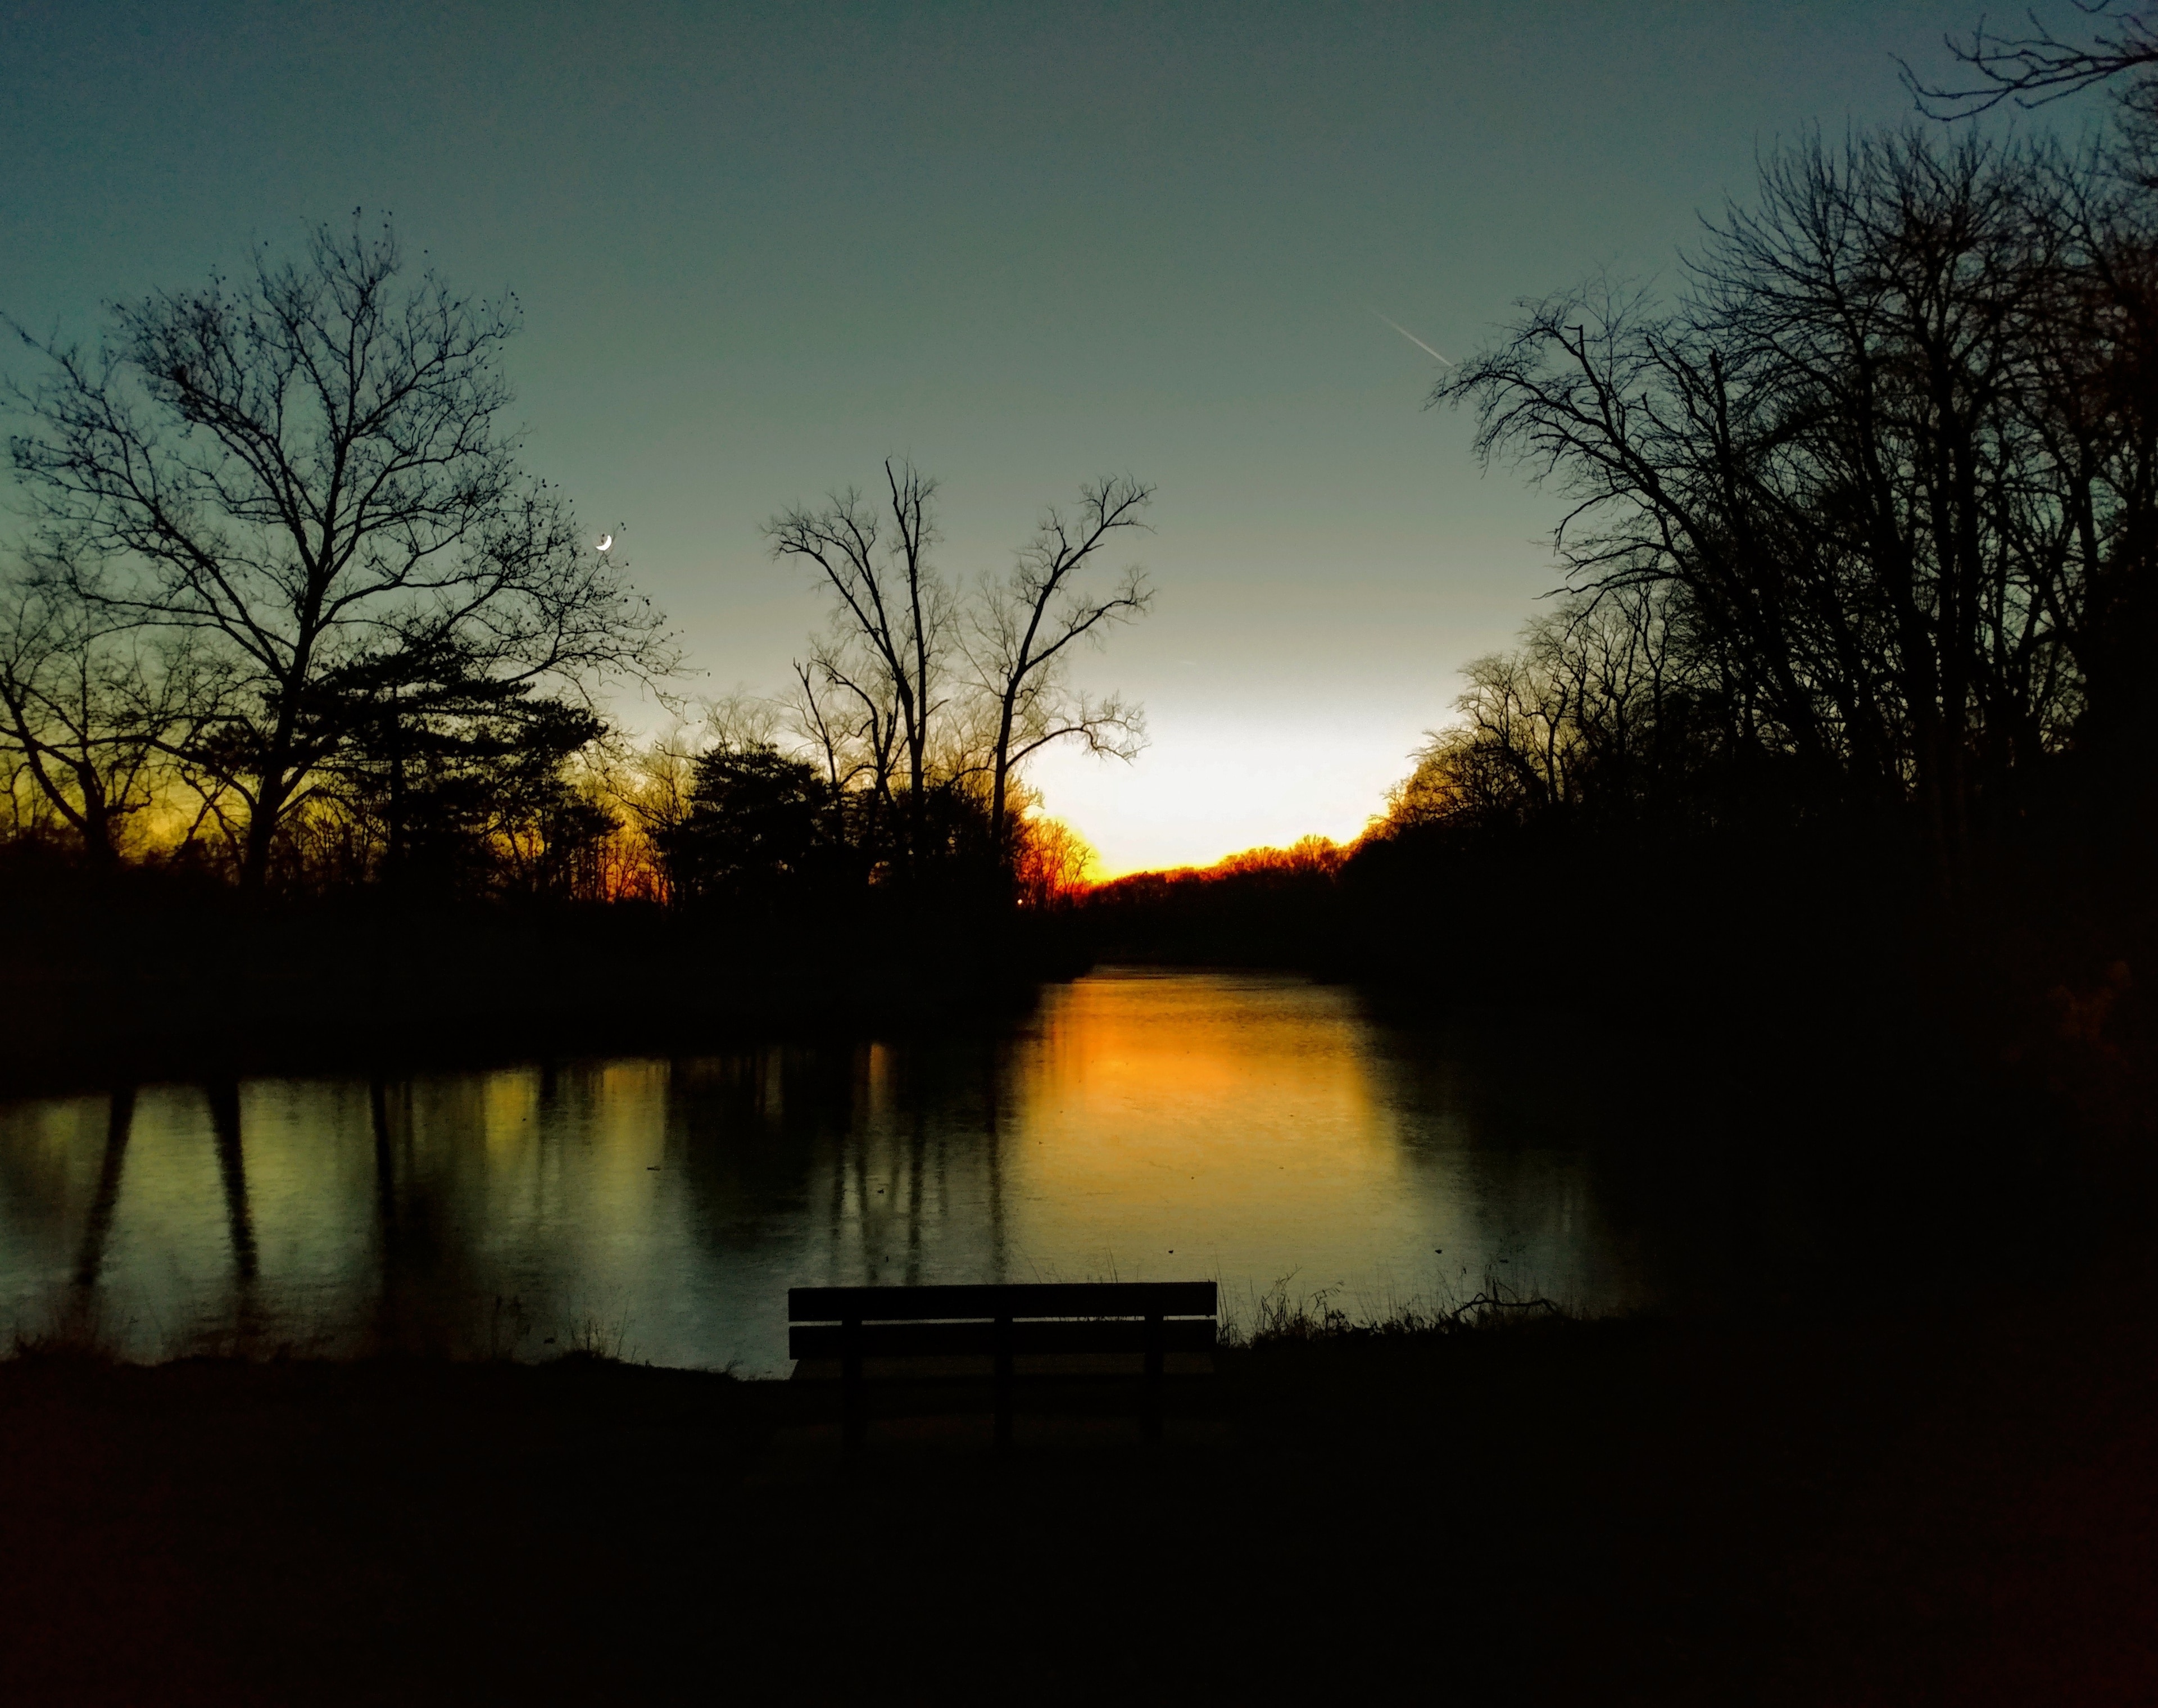 Sunset/moonrise at Sidecut Metropark in Maumee.